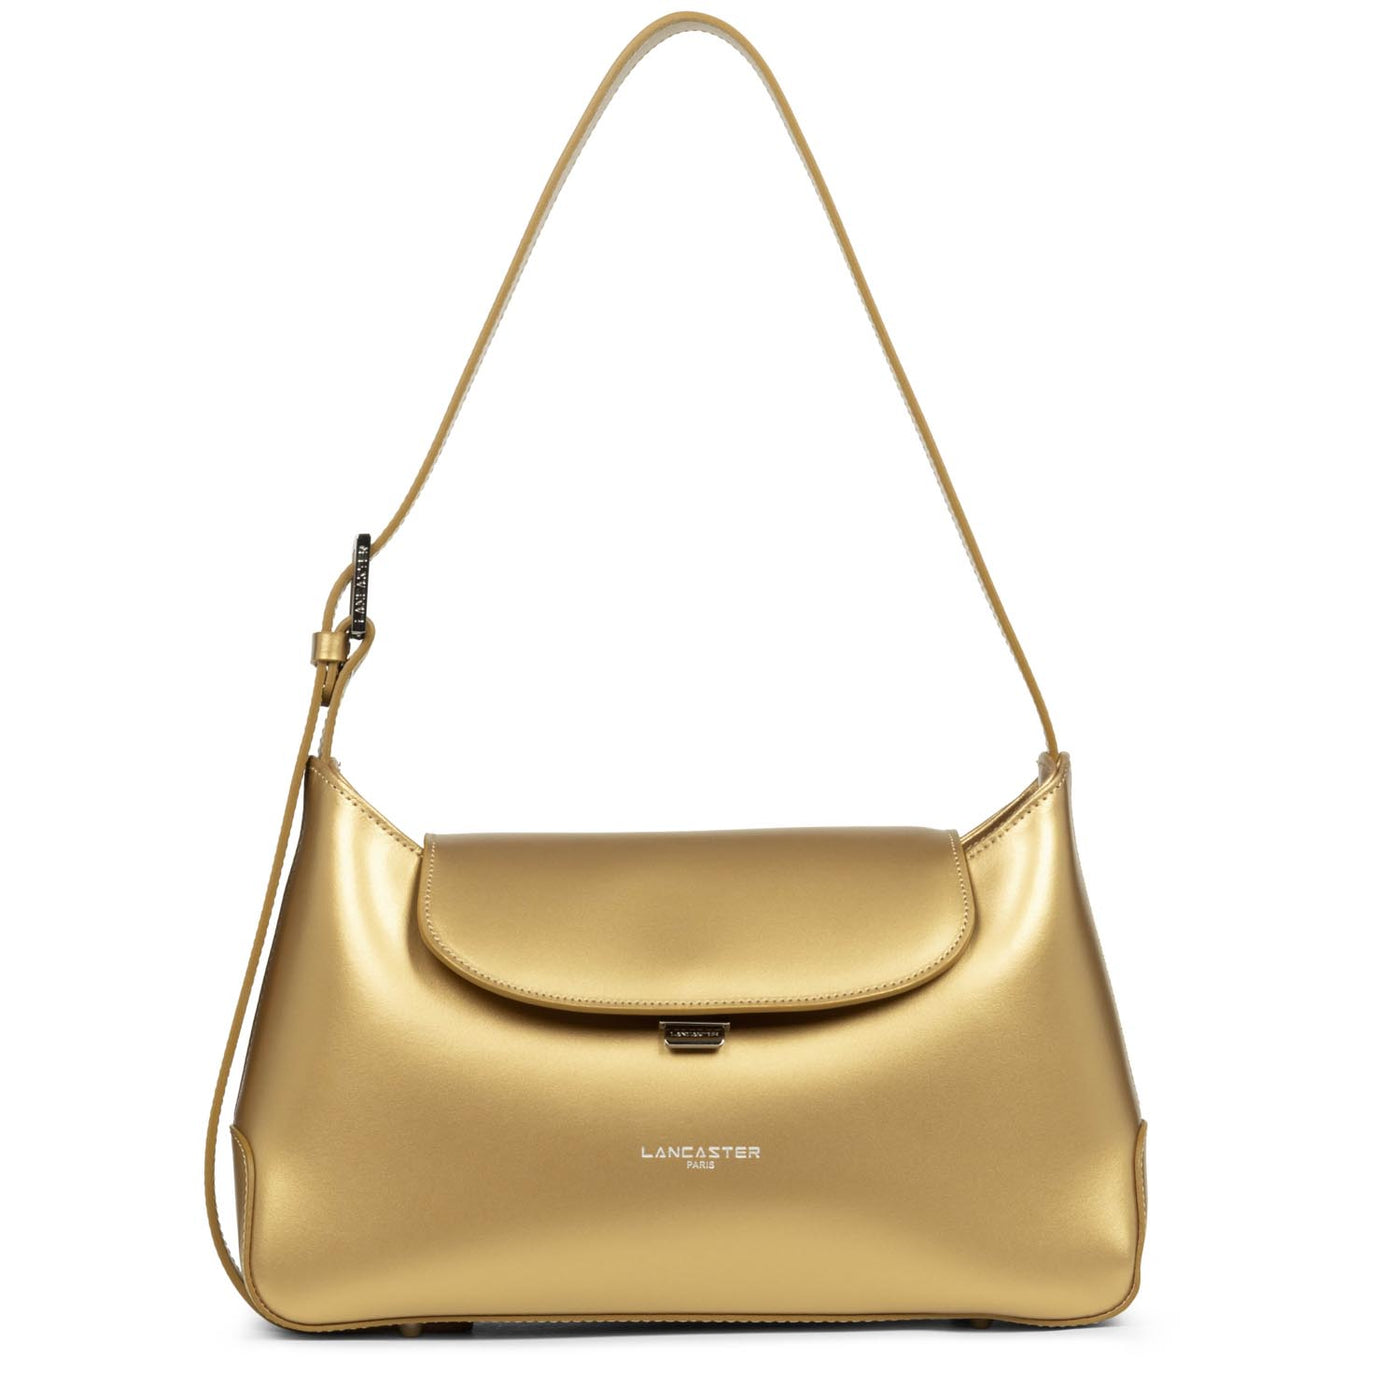 sac hobo - suave ace #couleur_gold-antic